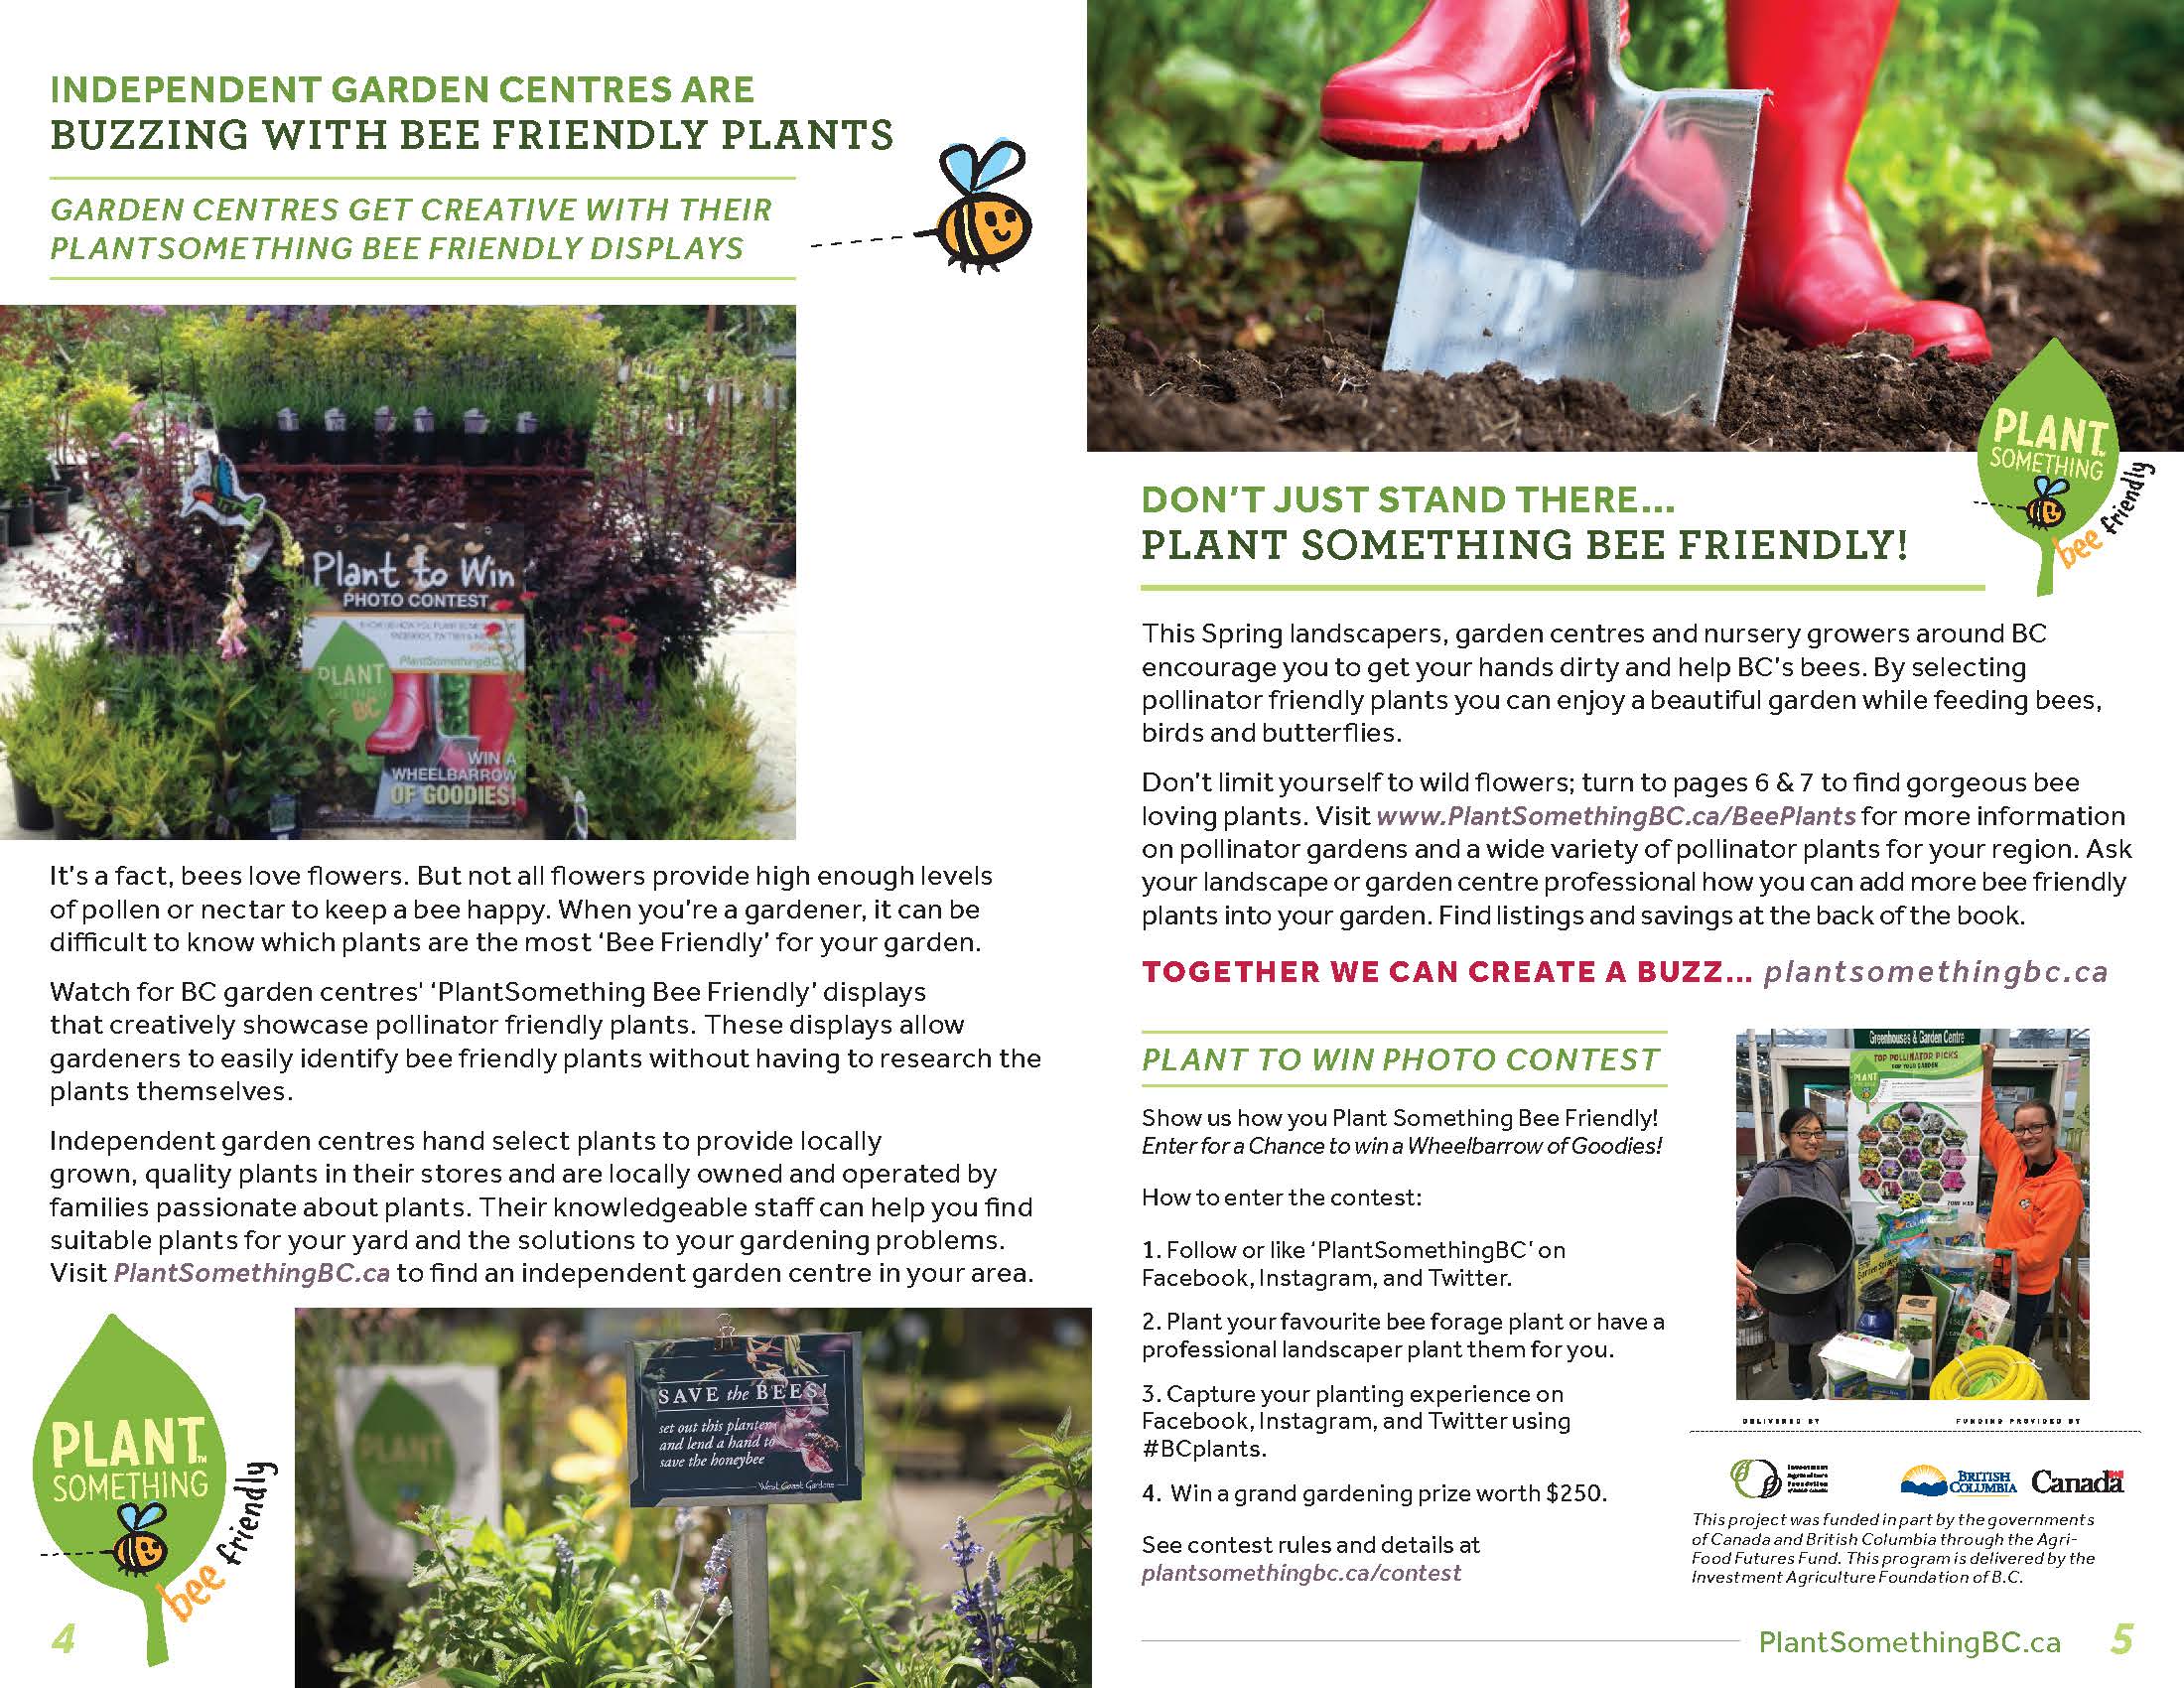 BCLNA_GardenWise_Booklet_FA_ReaderSpreads_Page_03.jpg